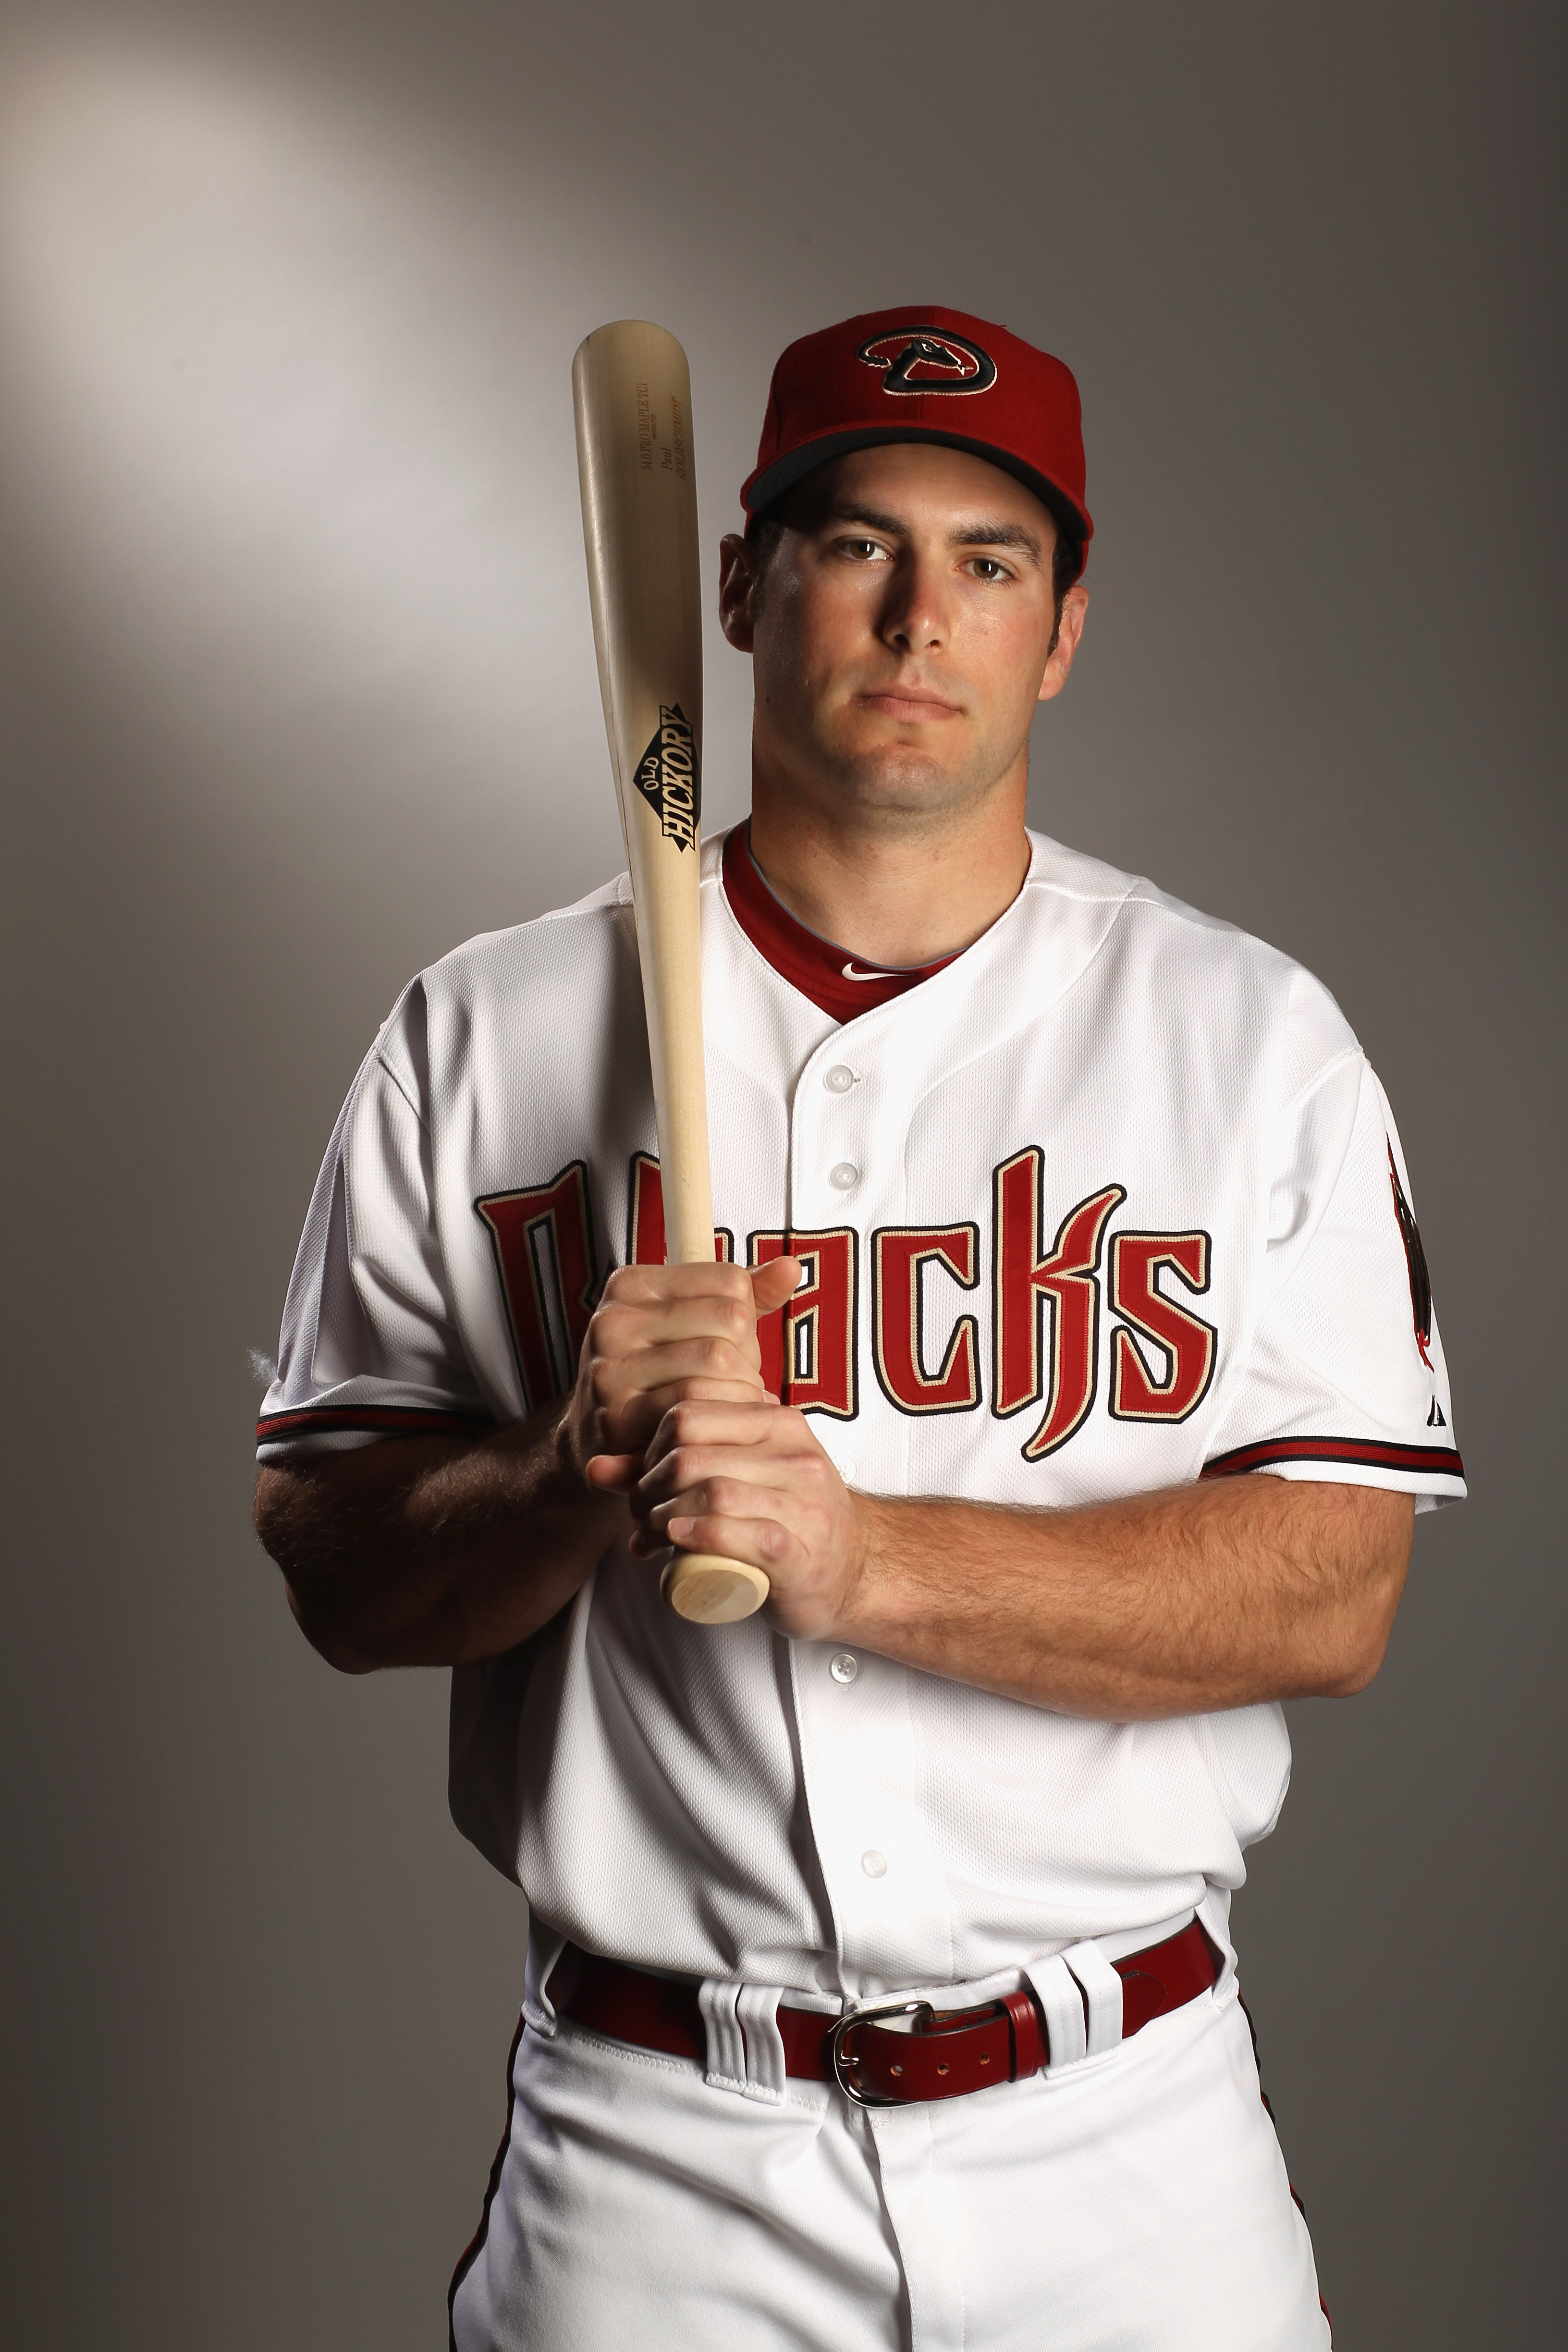 What Pros Wear: Paul Goldschmidt's Old Hickory TC1 Maple Bat - What Pros  Wear